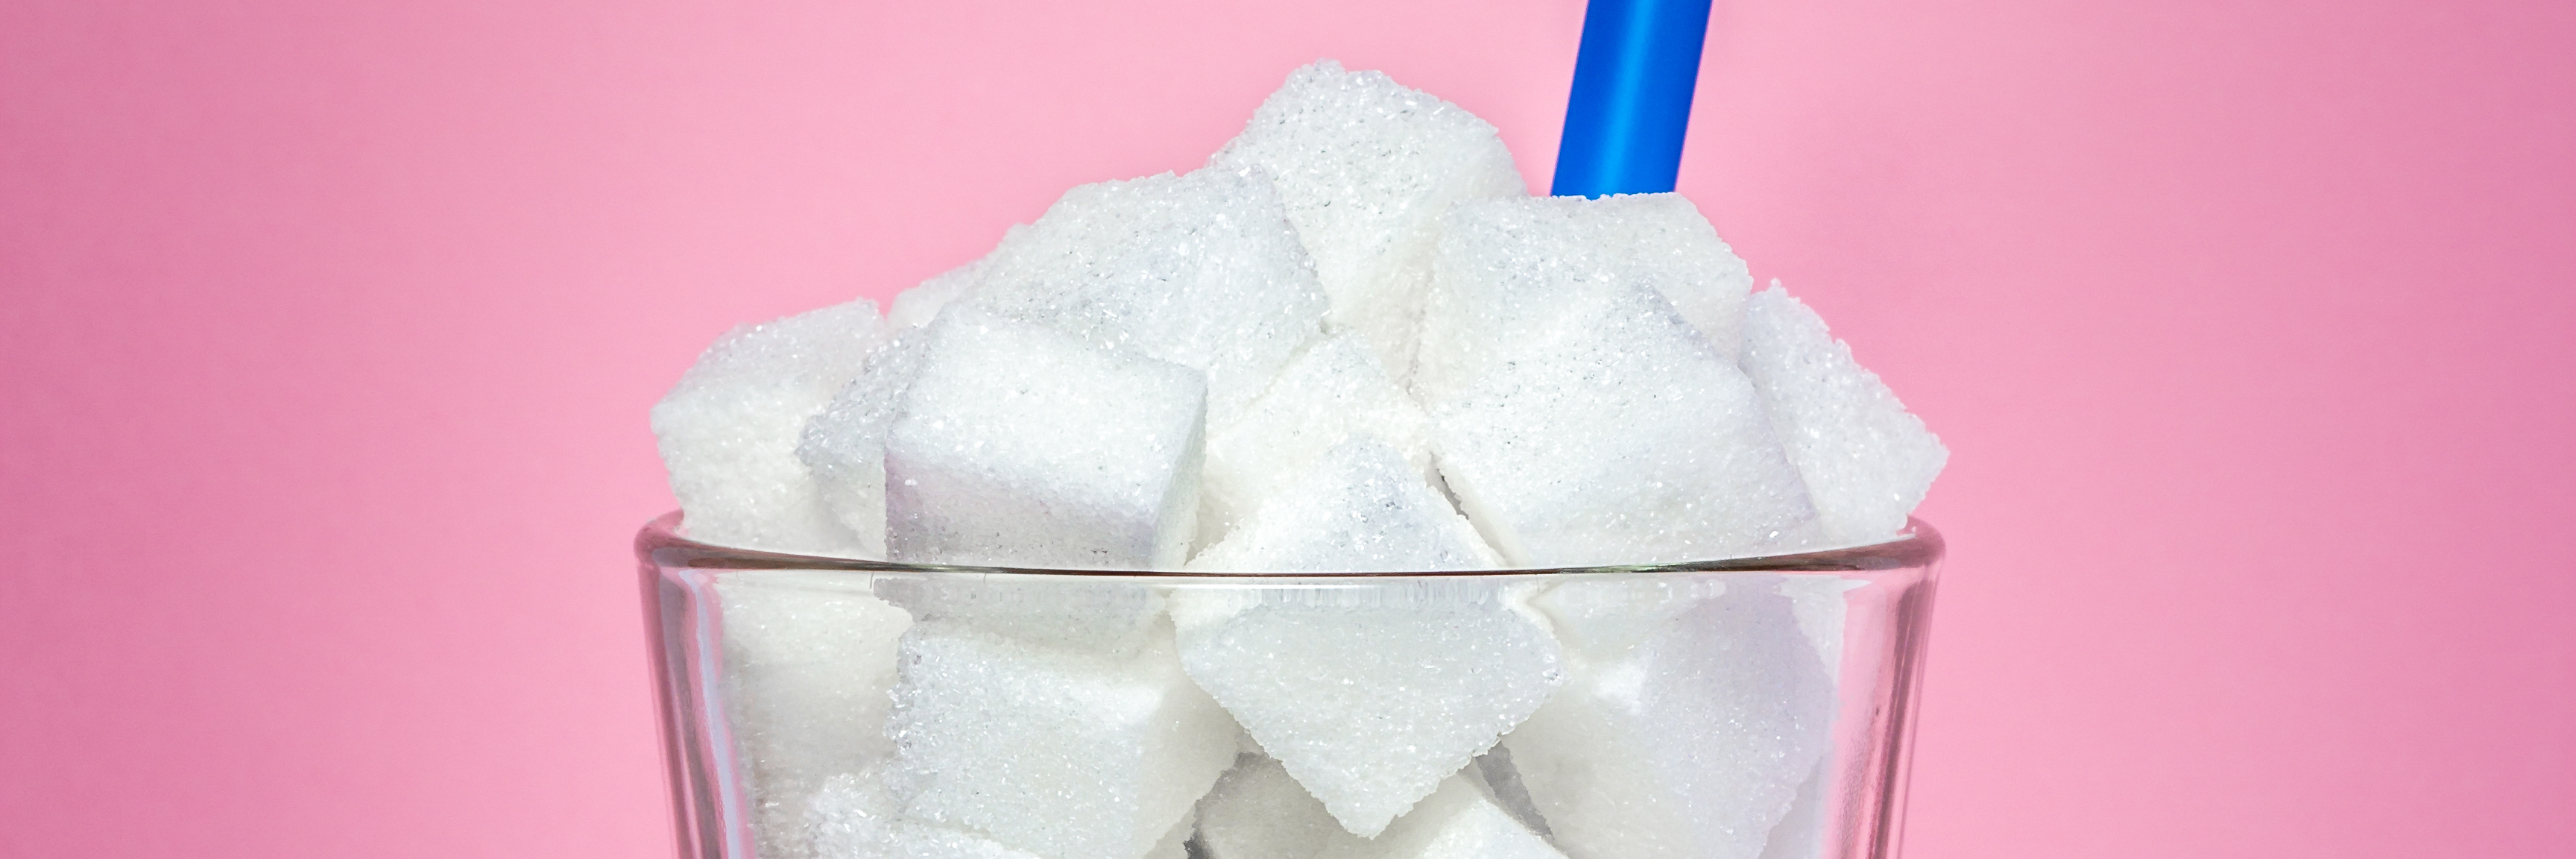 Glass full of sugar cubes on a pink background with a blue straw